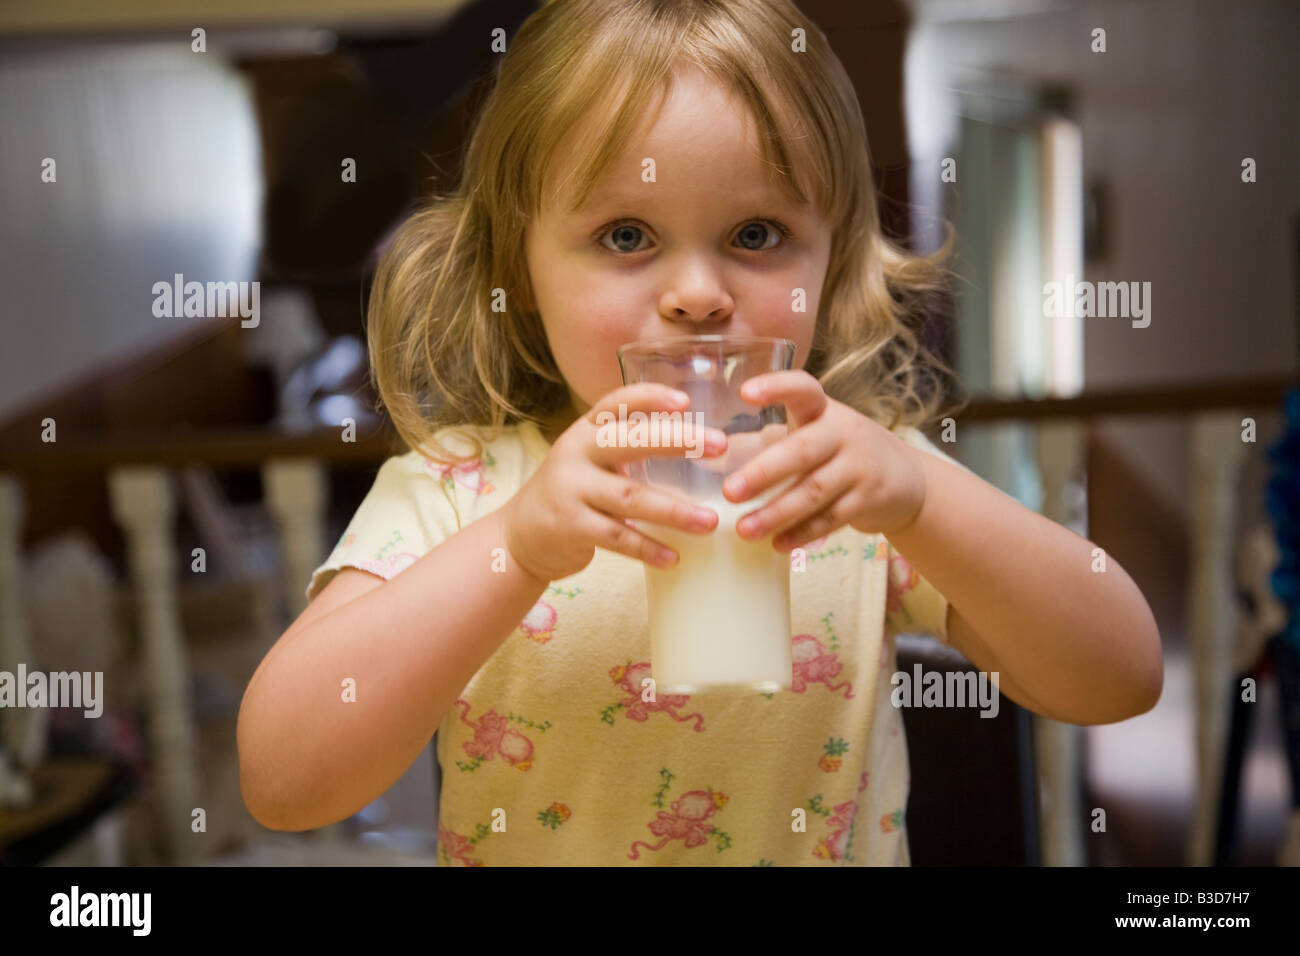 Three-year-old girl drinking milk from a glass. Stock Photo